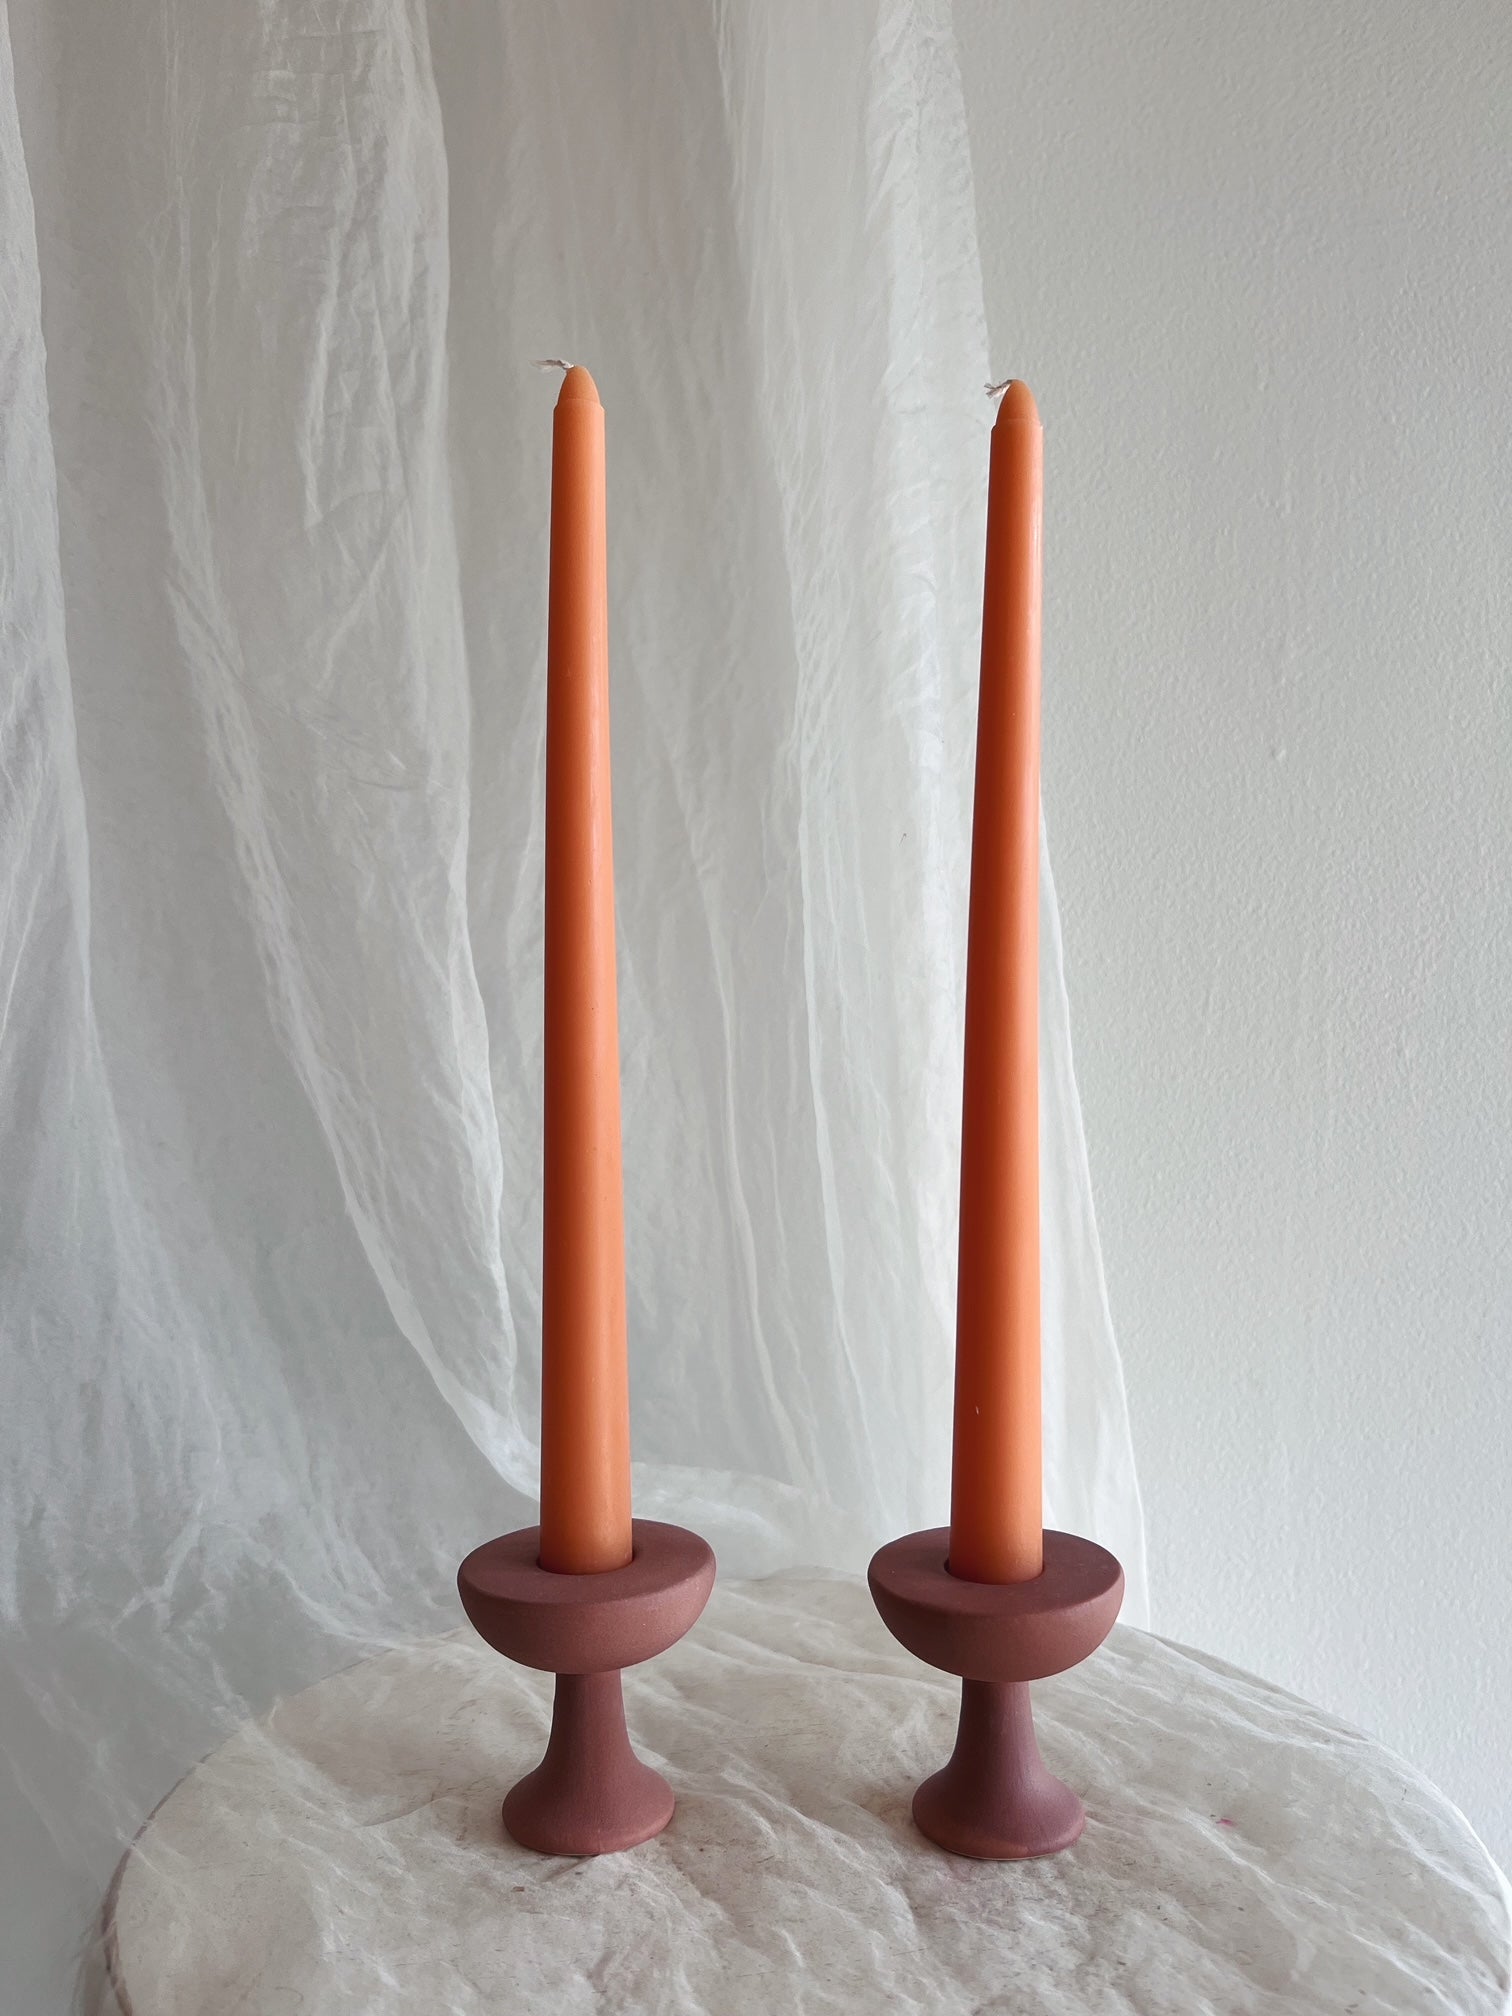 12 Inch Soy Wax Taper Candle - Apricot